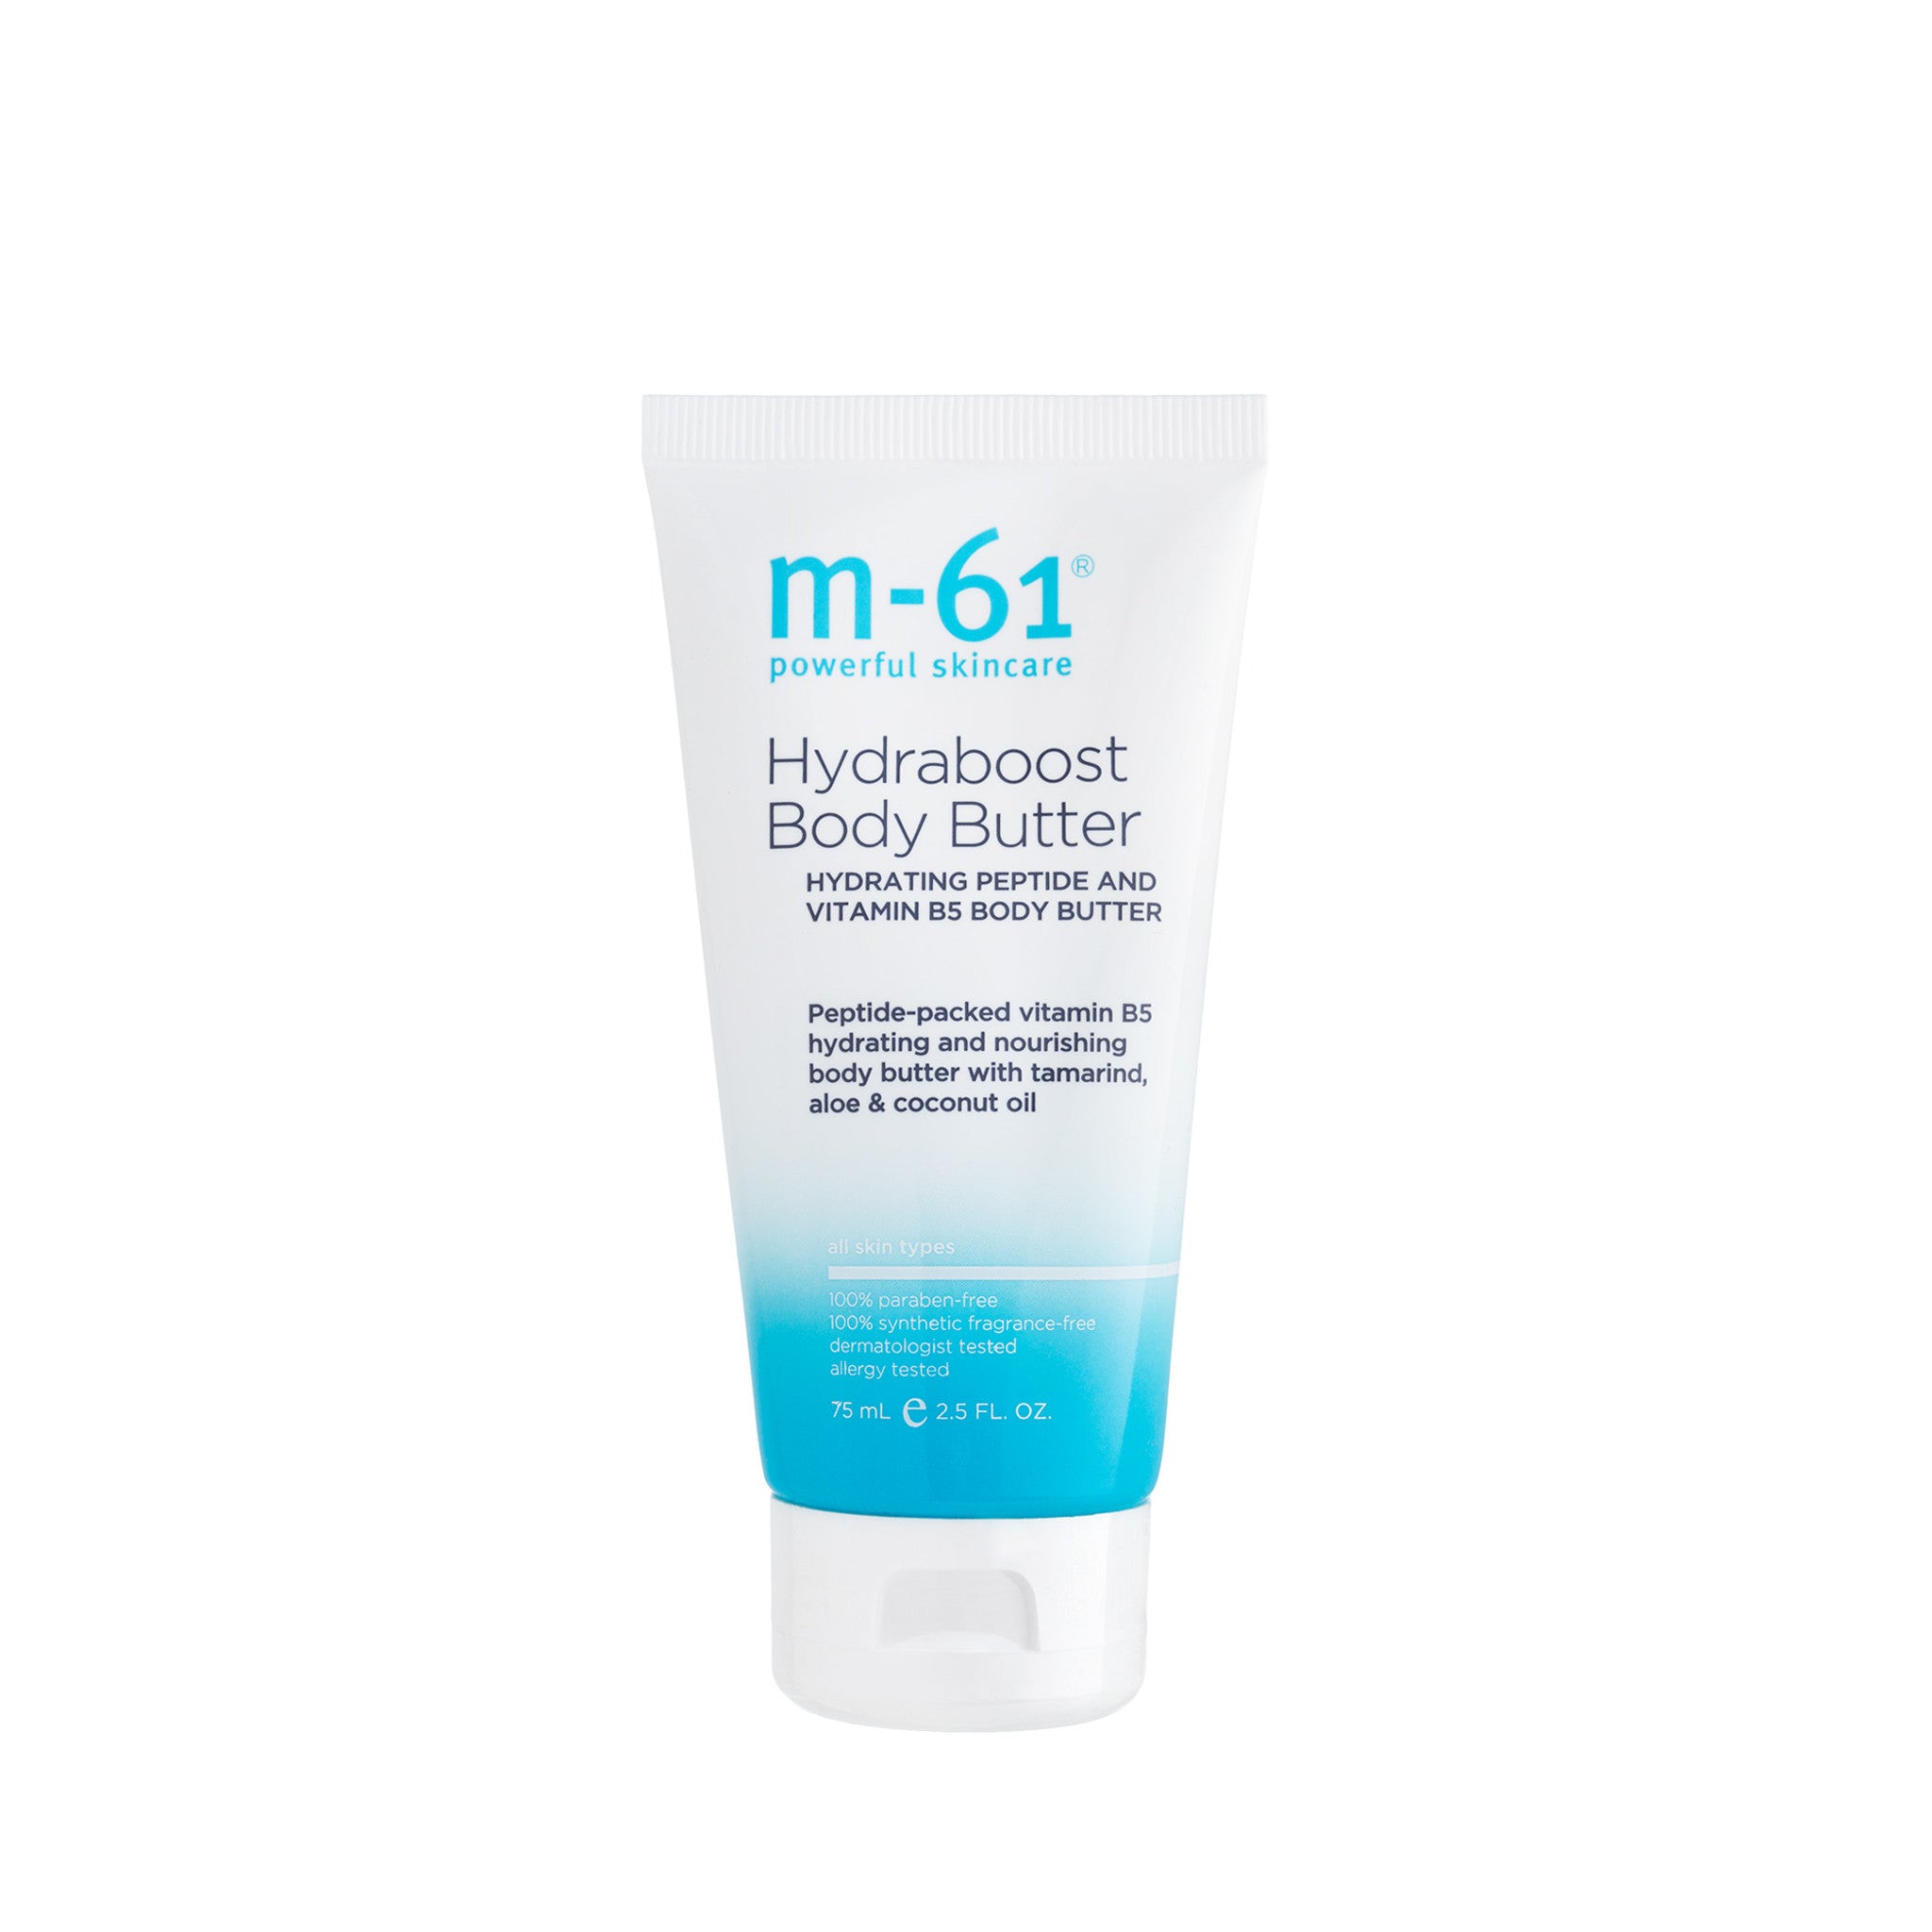 M-61 Hydraboost Body Butter Size variant: 2.5 fl oz | 75 ml main image.